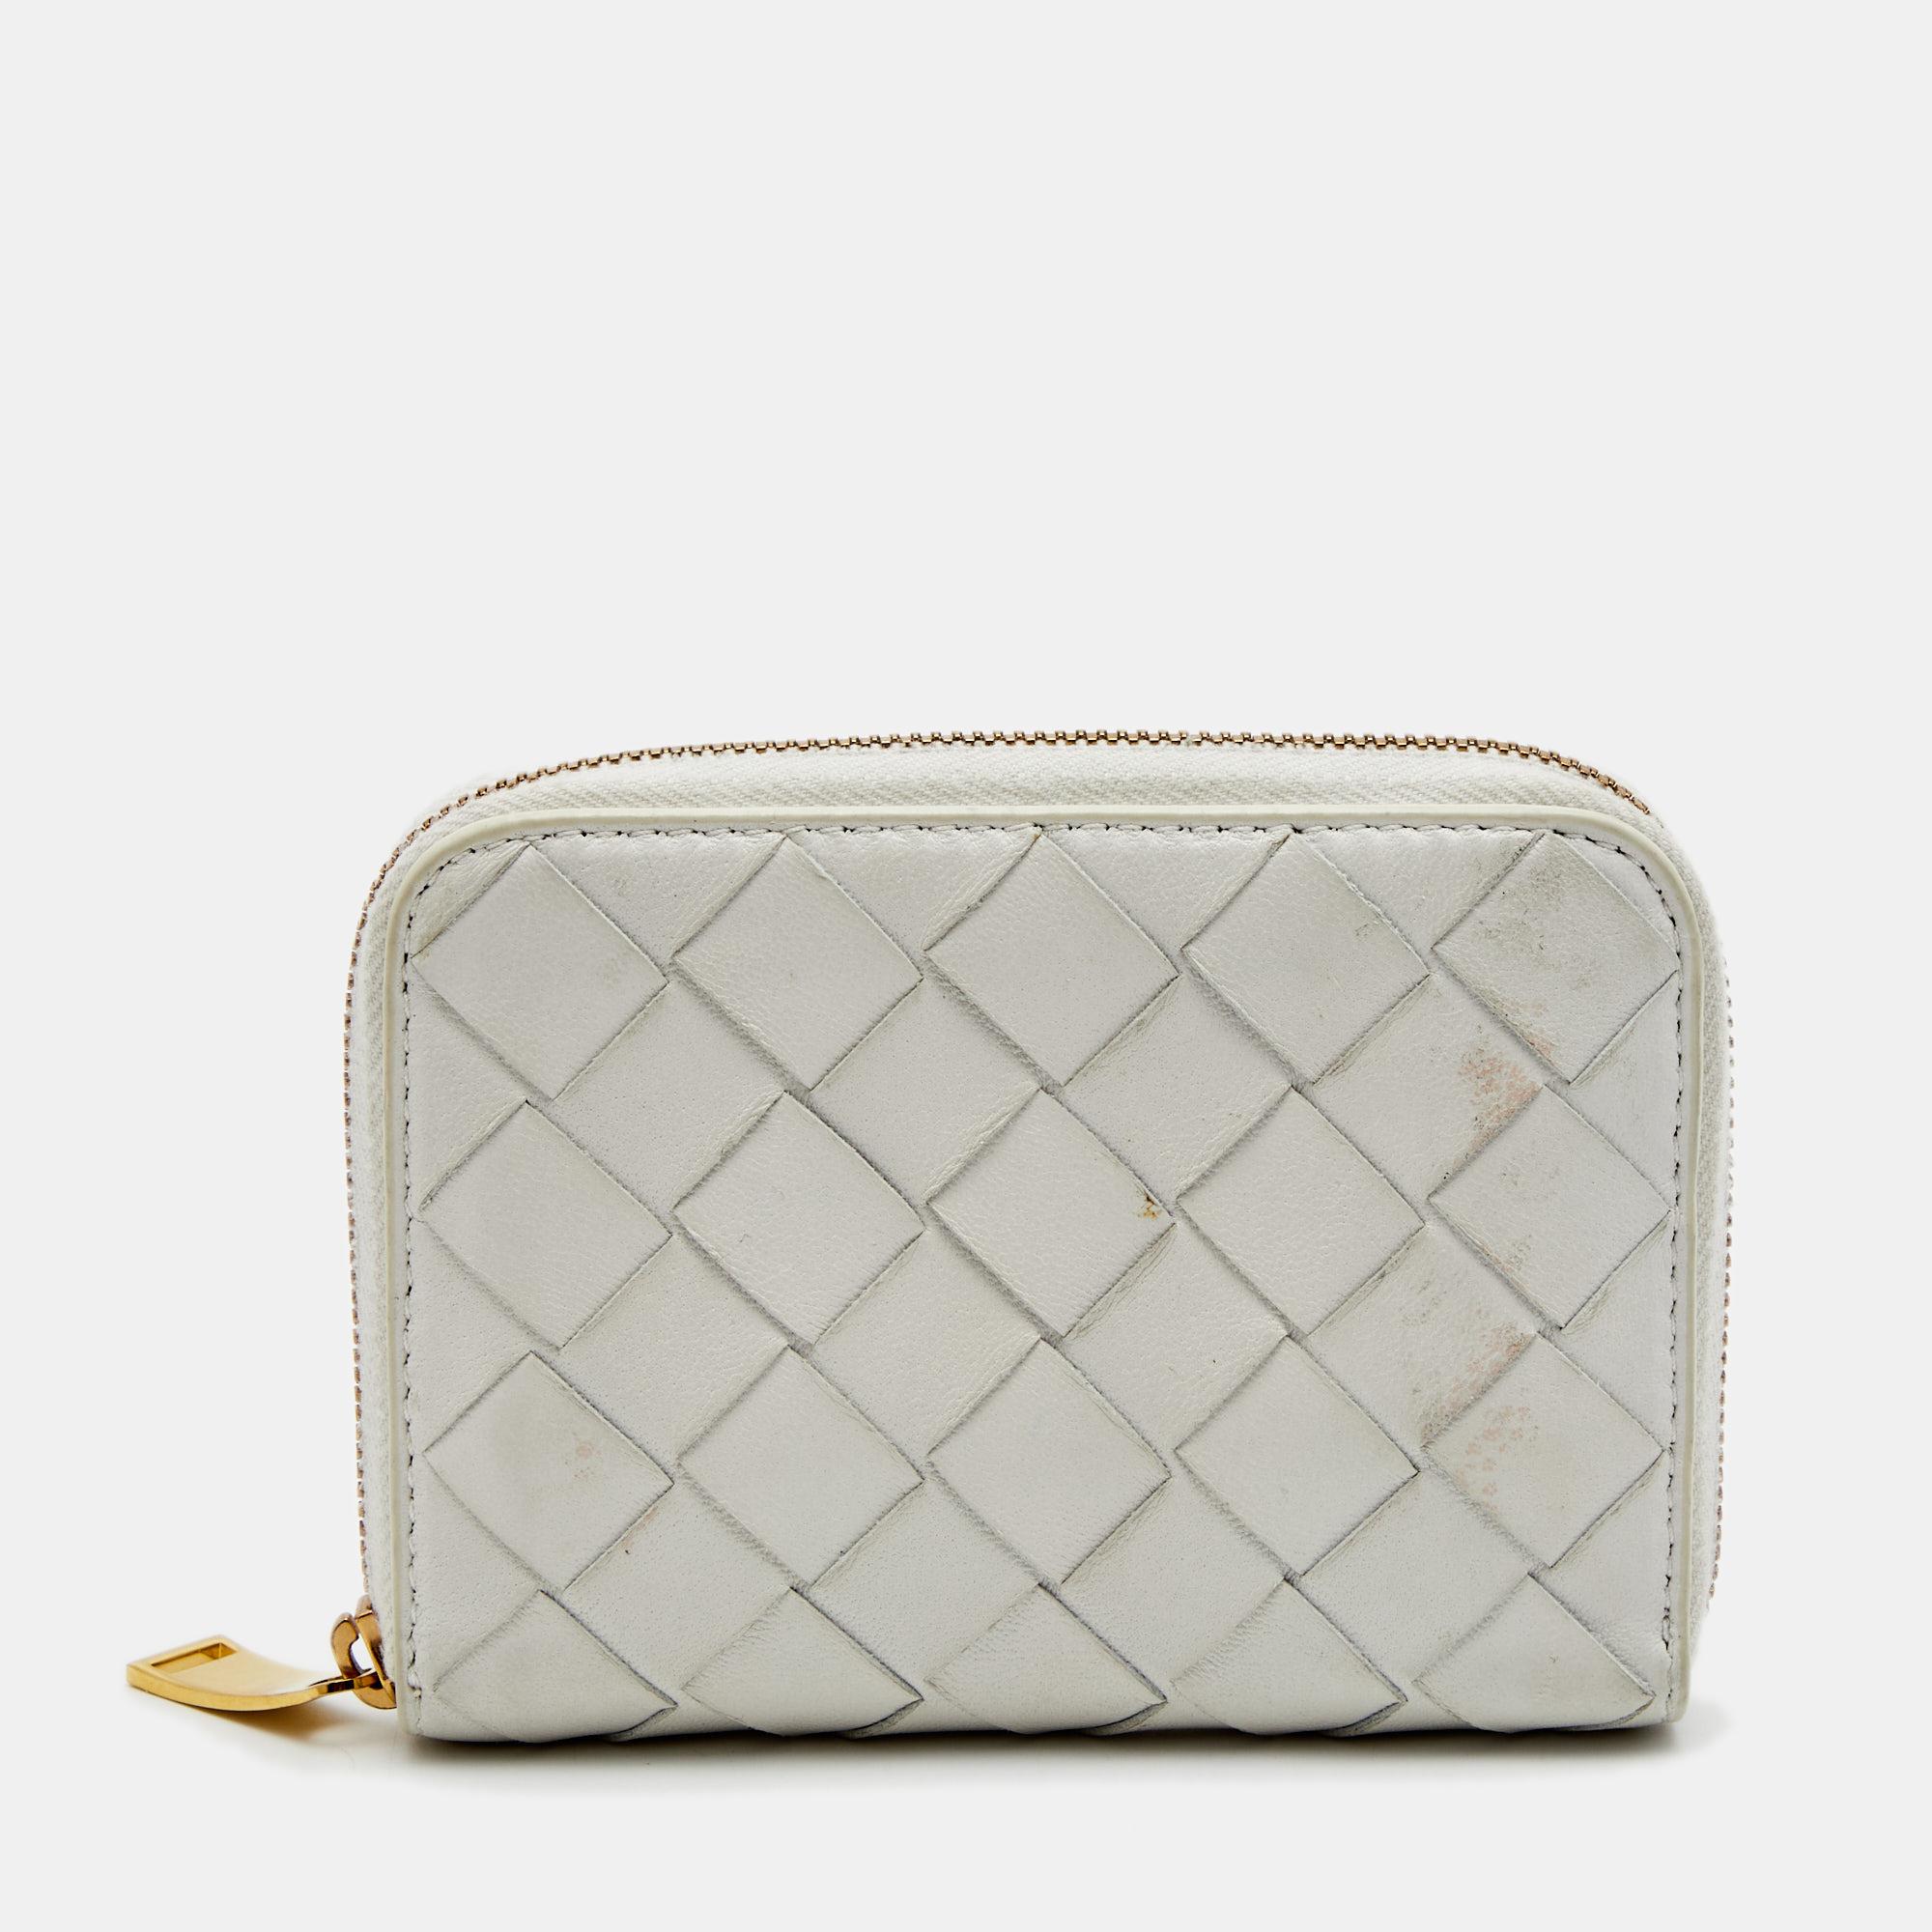 Bottega Veneta's leather coin purse is finished with the label's signature intrecciato weave – a heritage detail that brings an artisanal flourish to the simple composition. It's crafted in Italy with internal compartments lined with leather and